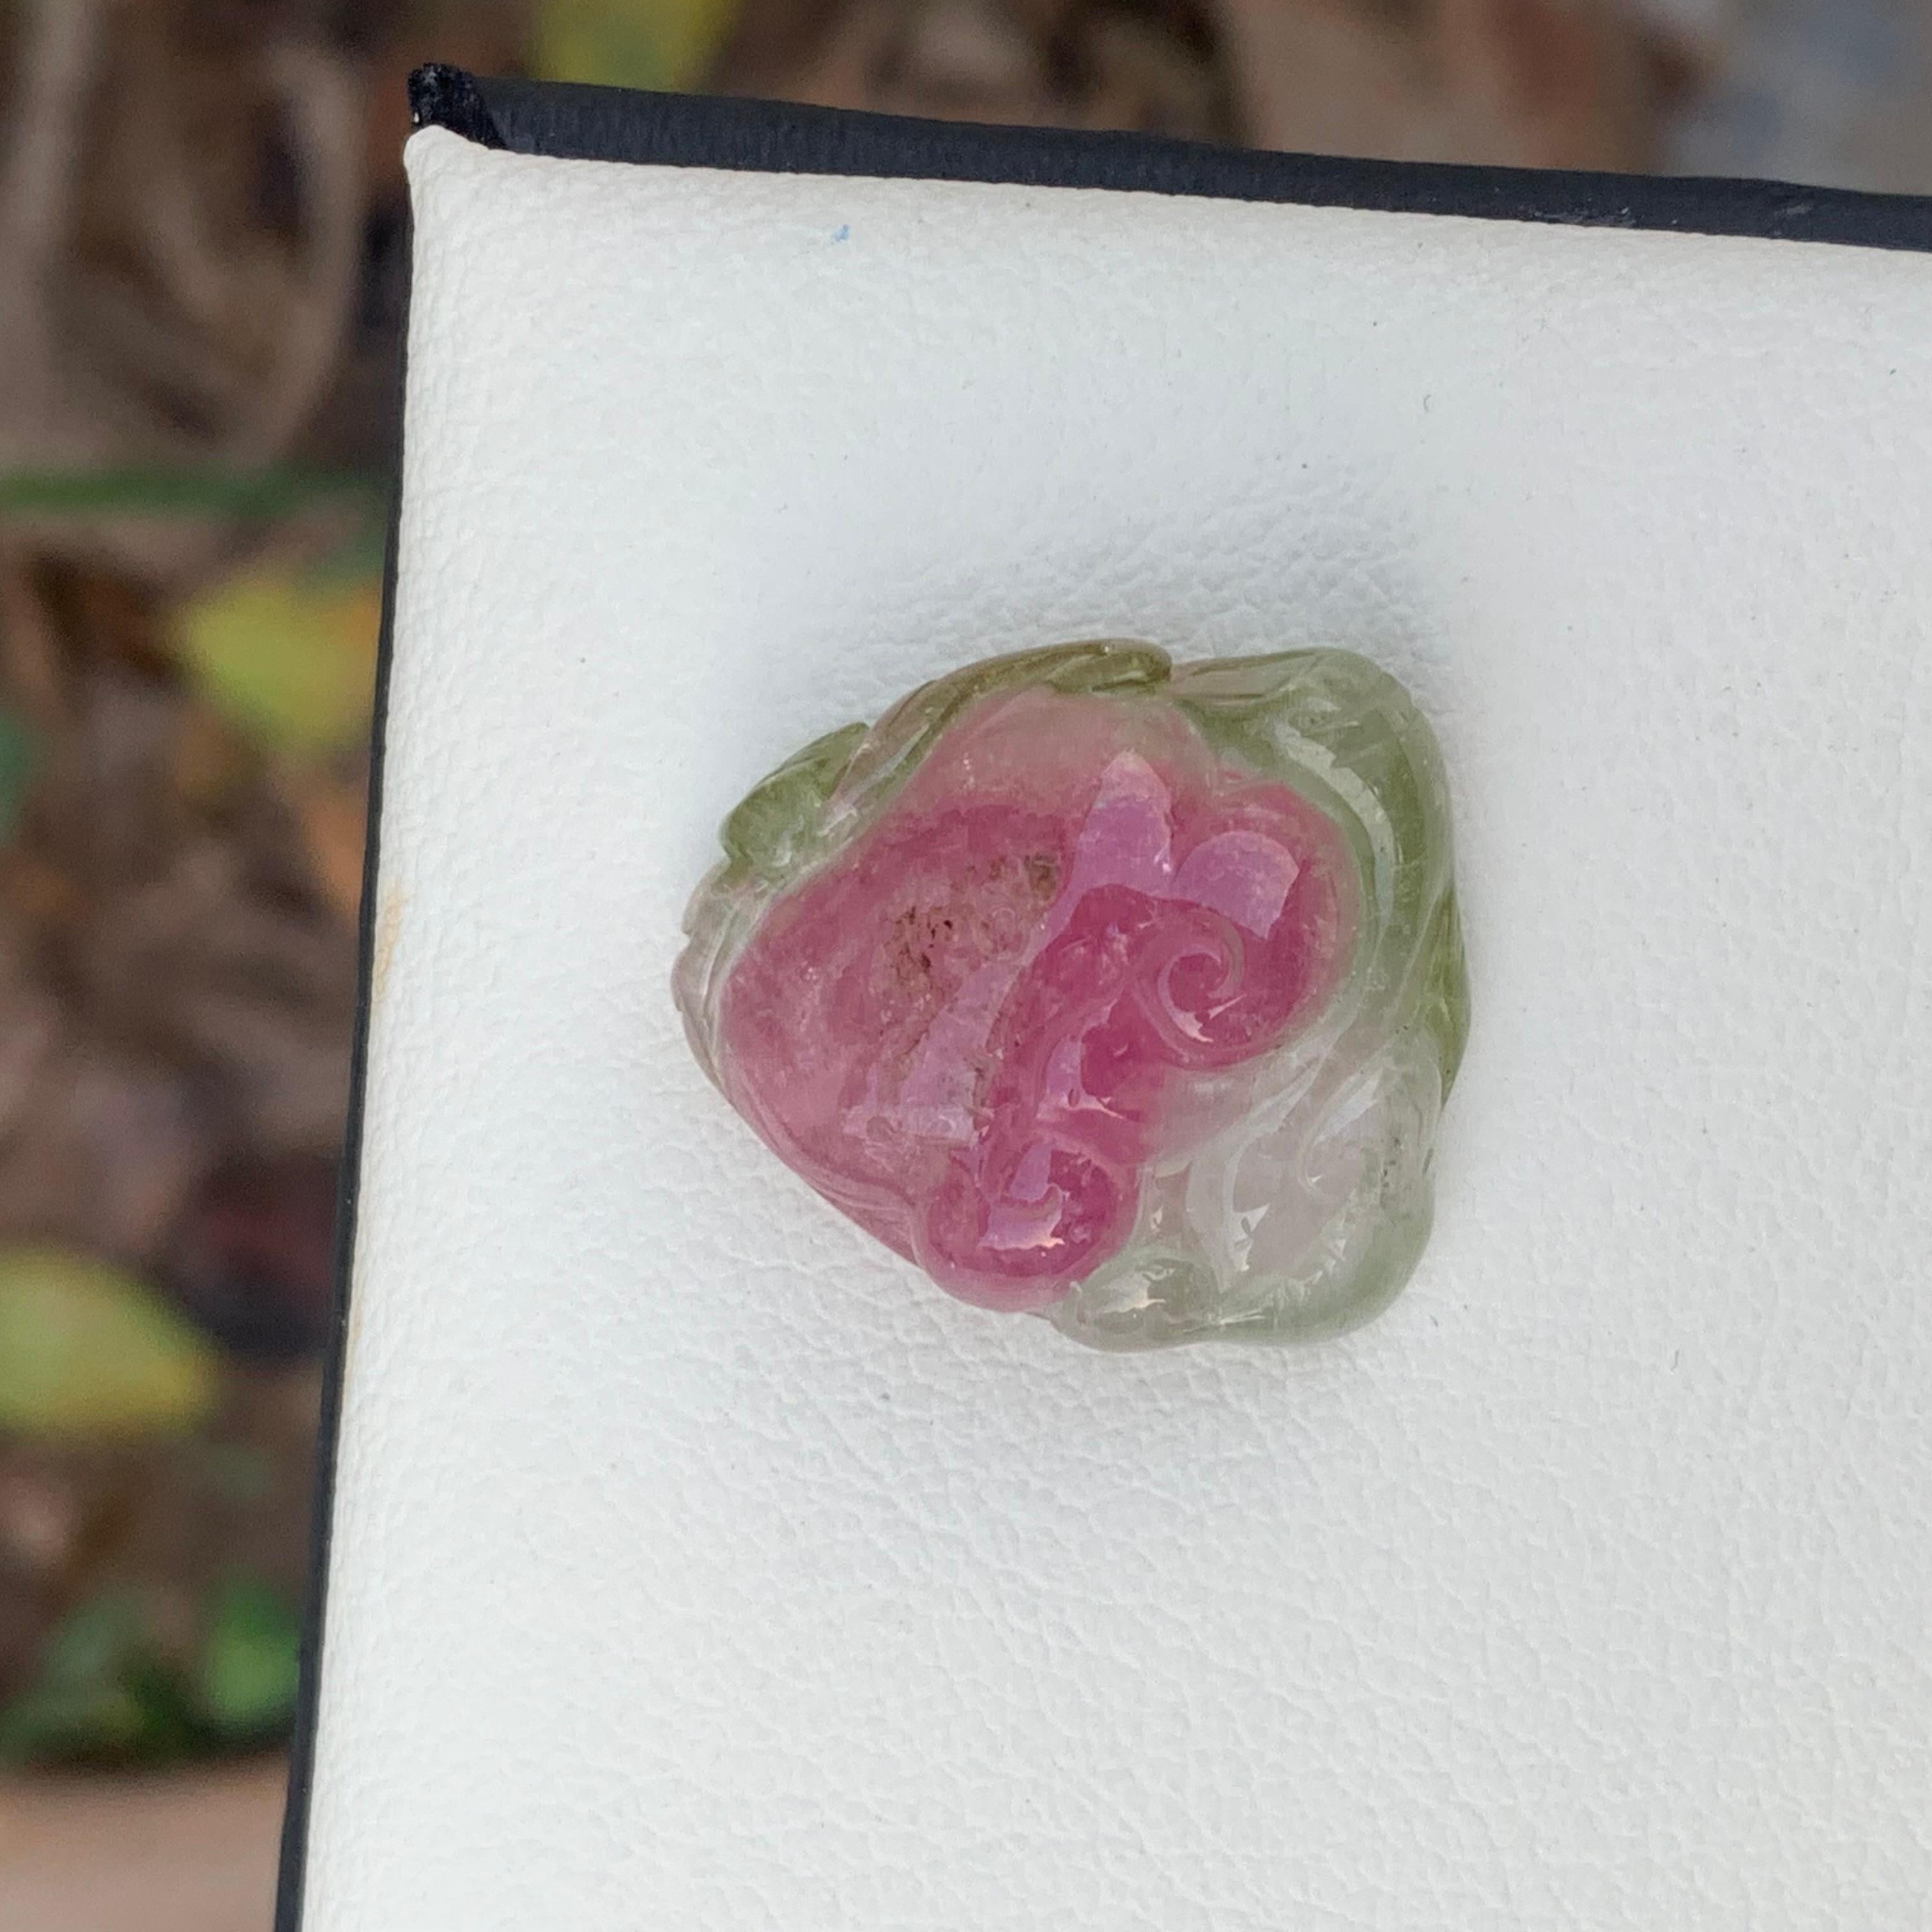 18th Century and Earlier 24.10 Carat Lovely Loose Water Melon Color Tourmaline Carving from Africa For Sale